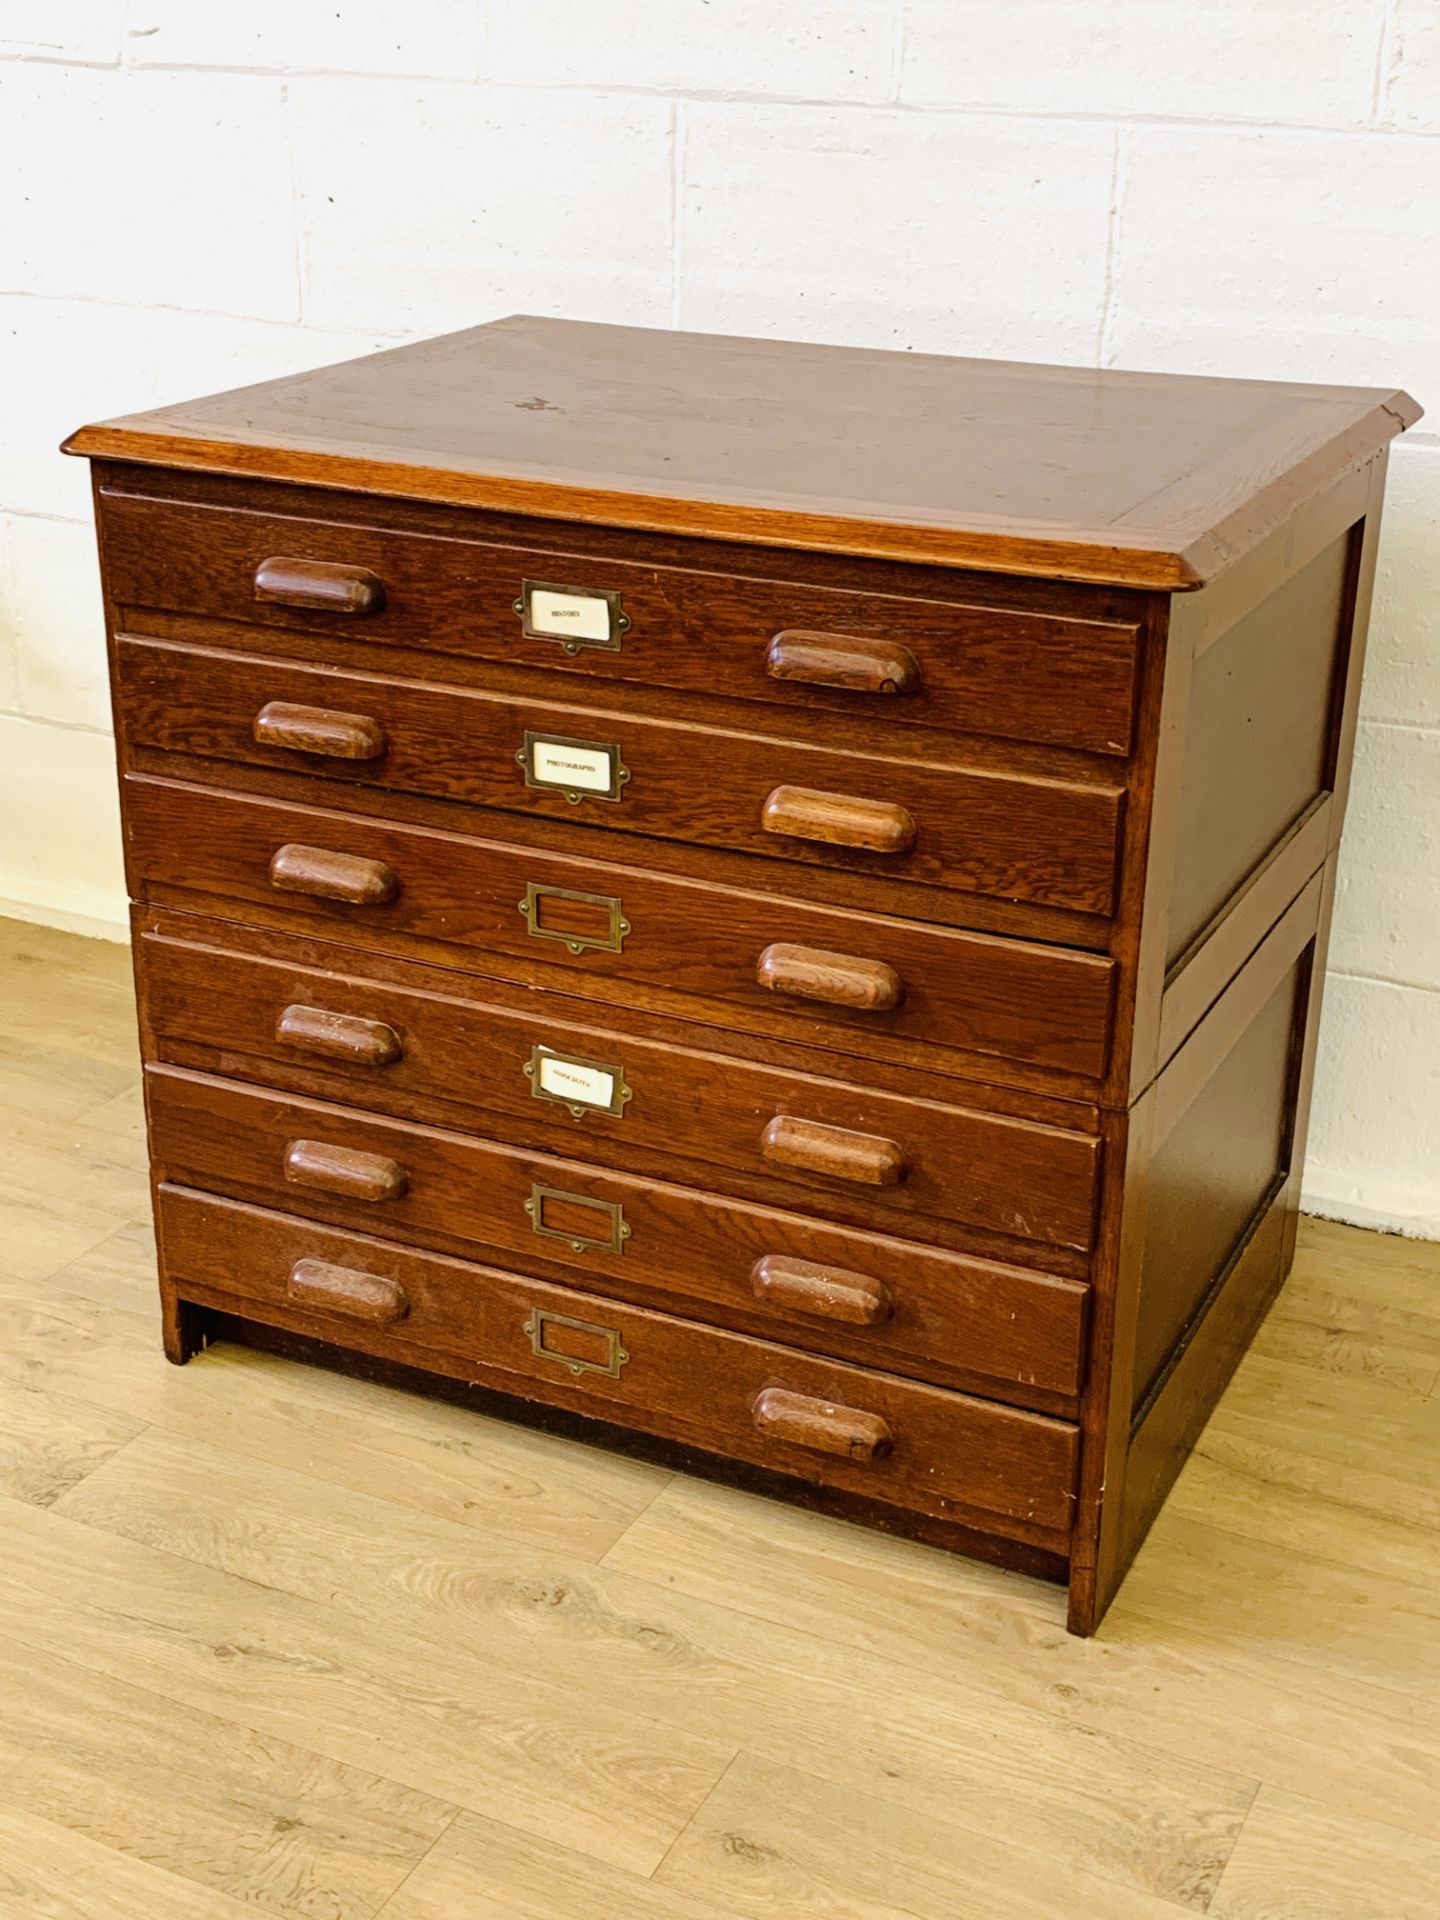 Pine plan chest. This item carries VAT. - Image 3 of 5